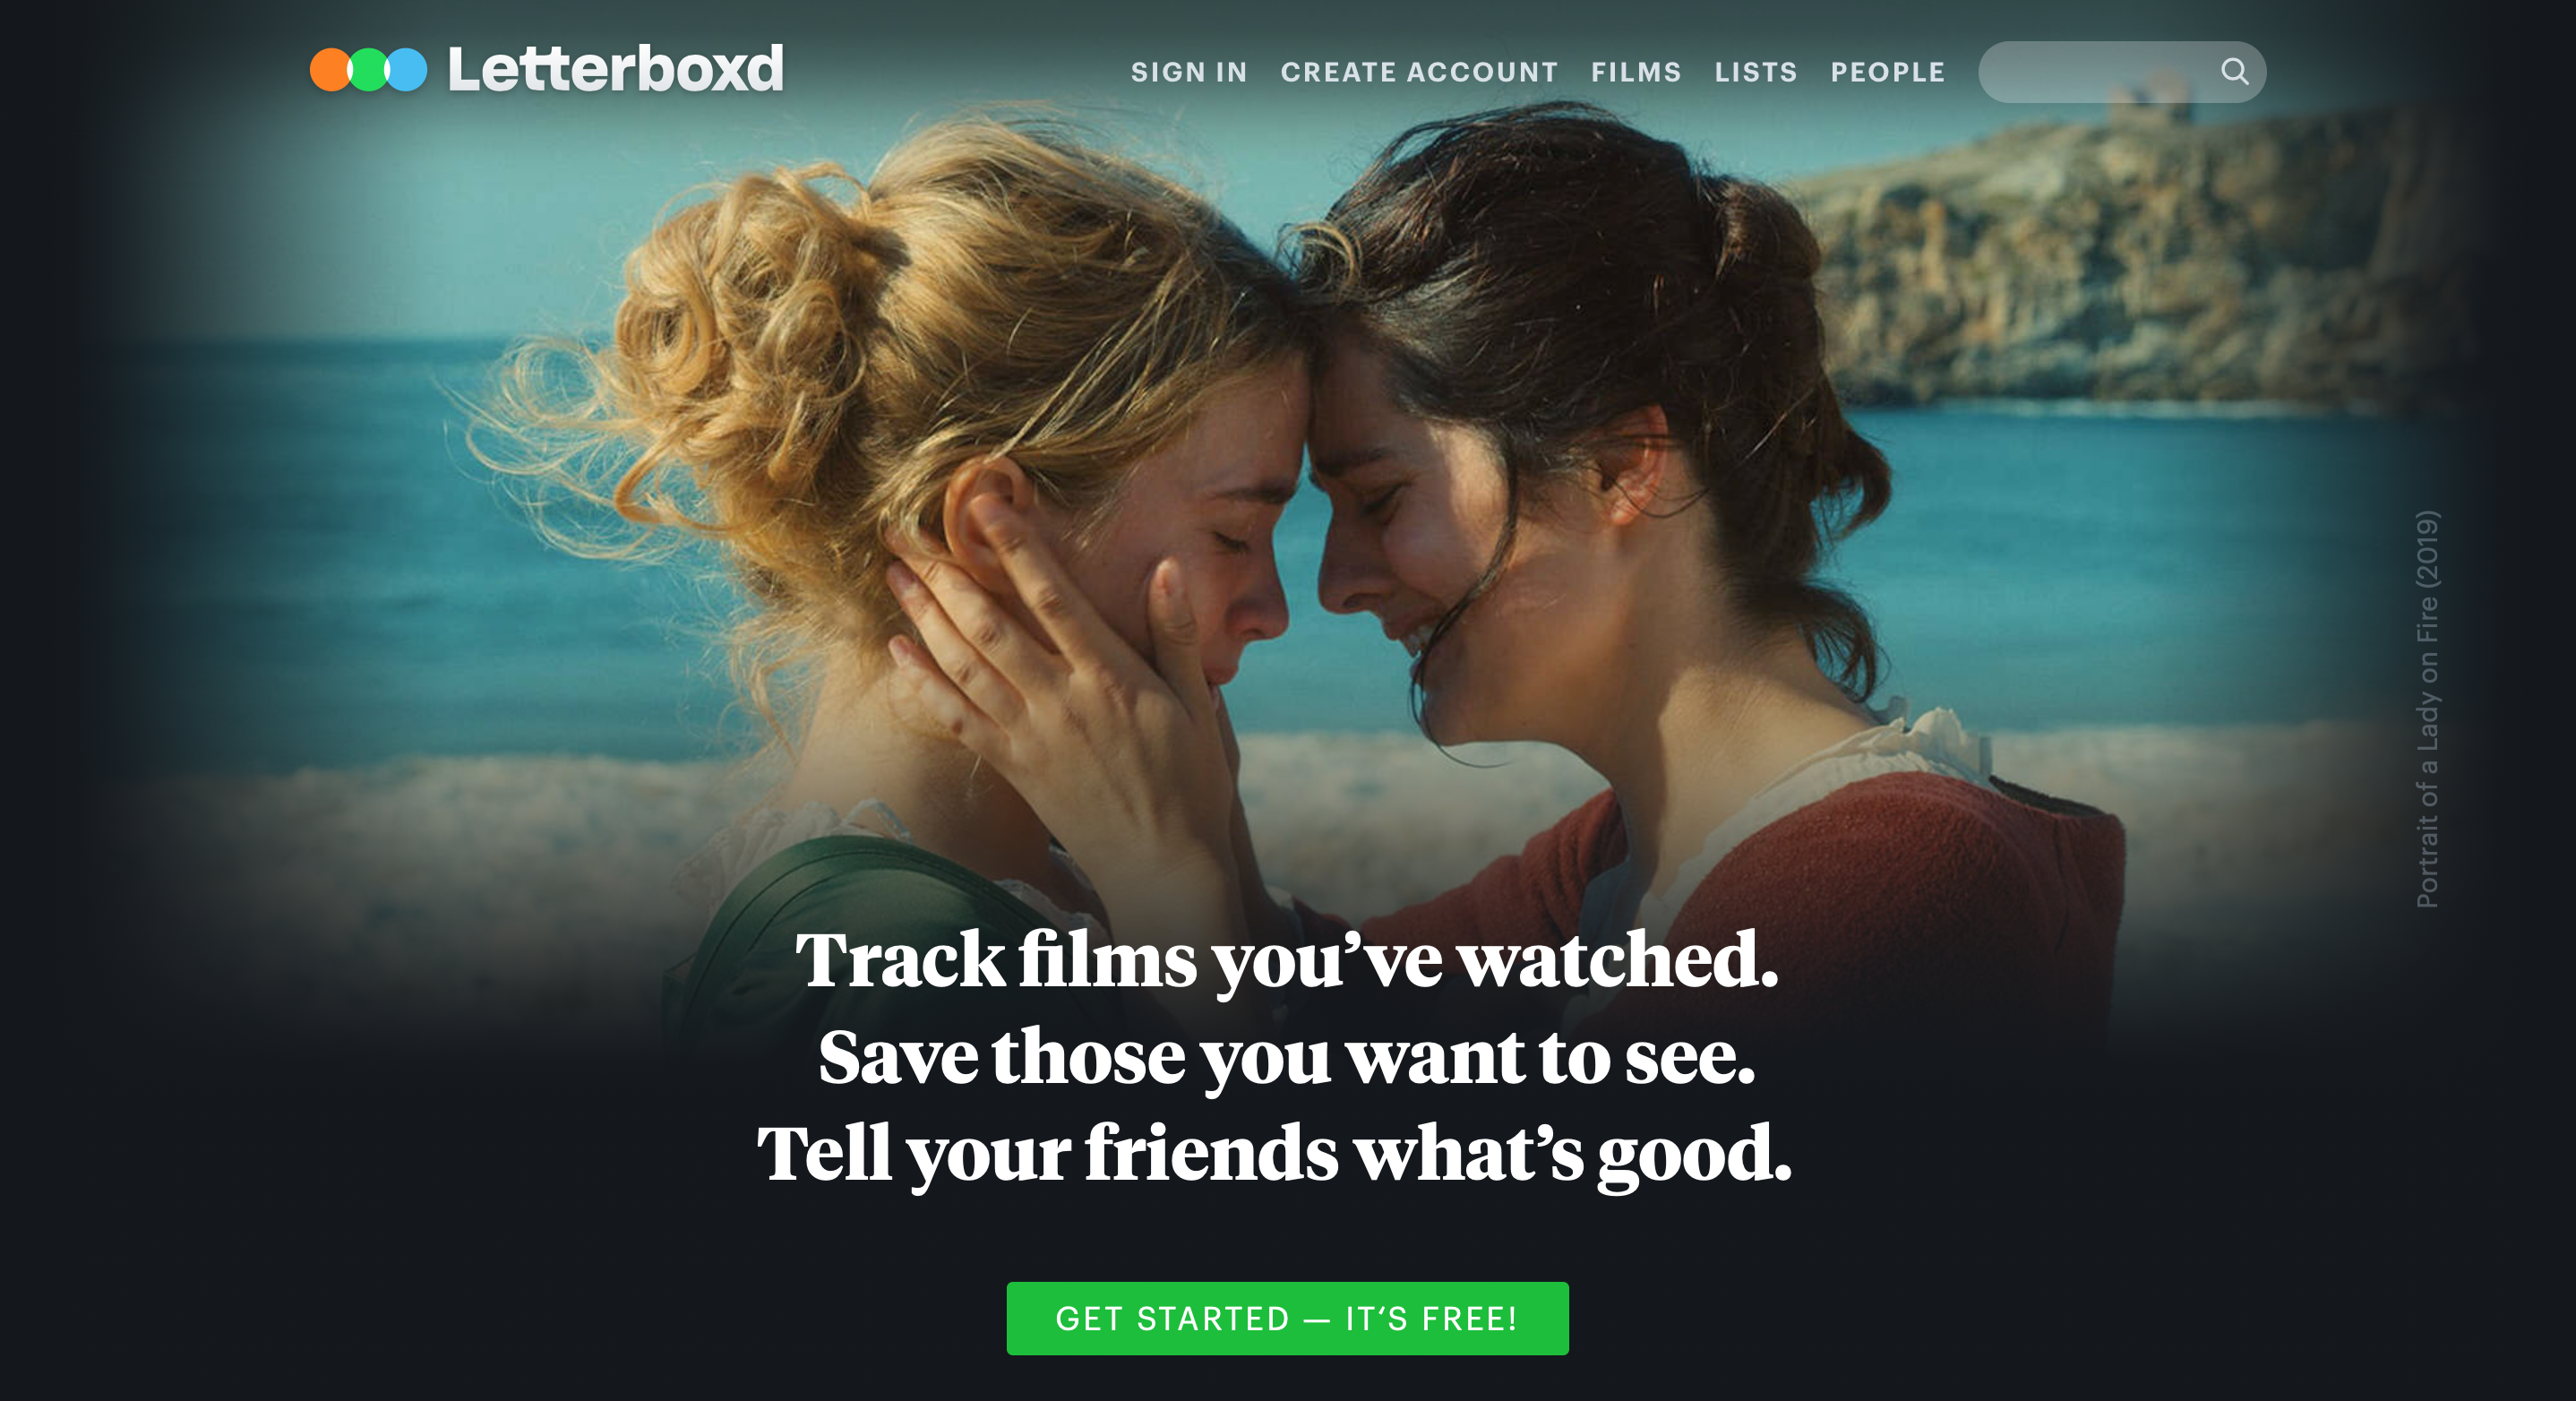 Site updates and move to Letterboxd